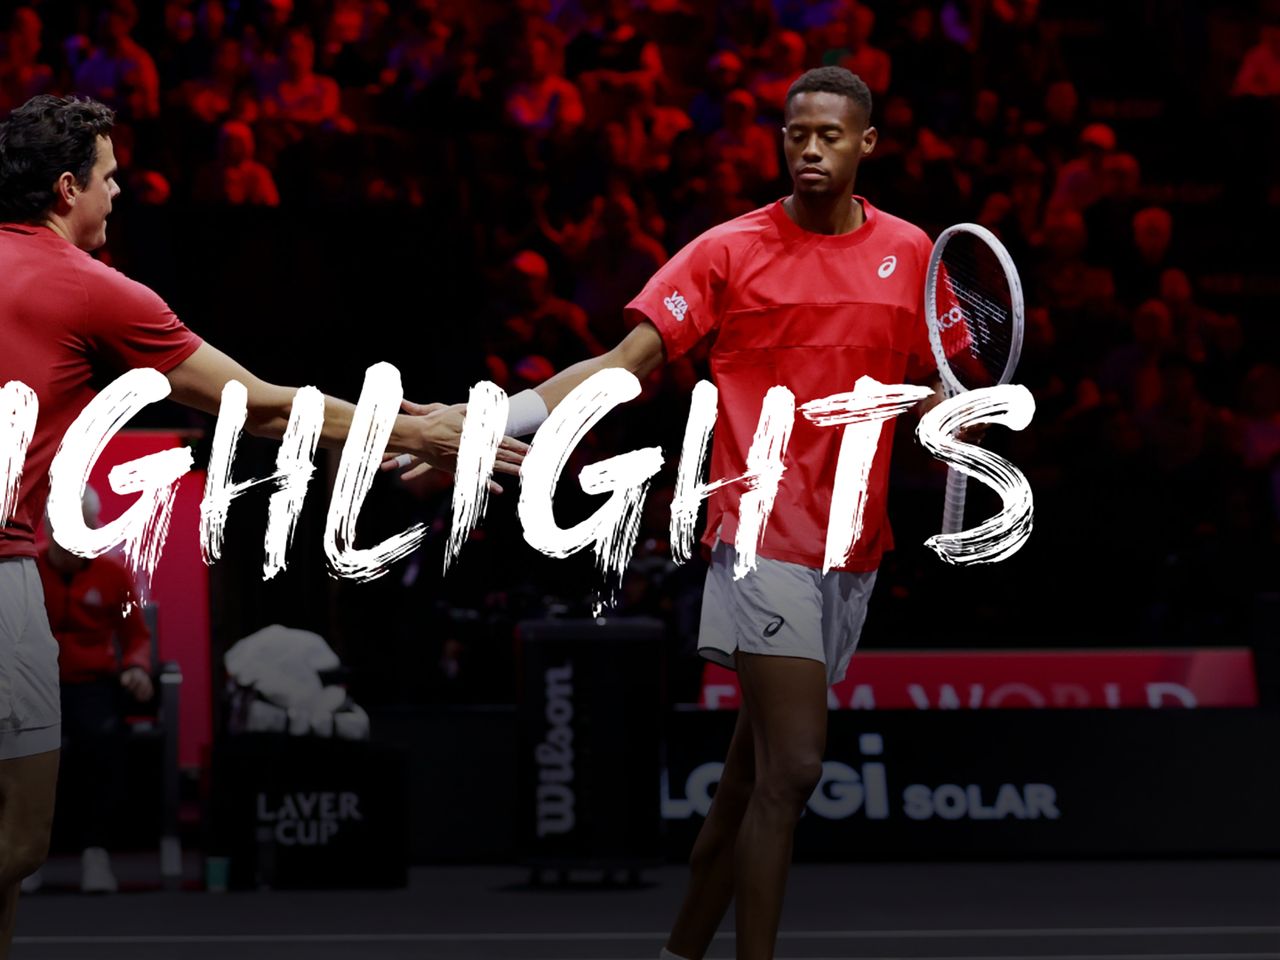 Laver Cup highlights - Christopher Eubanks and Milos Raonic add another victory for dominant Team World - Tennis video